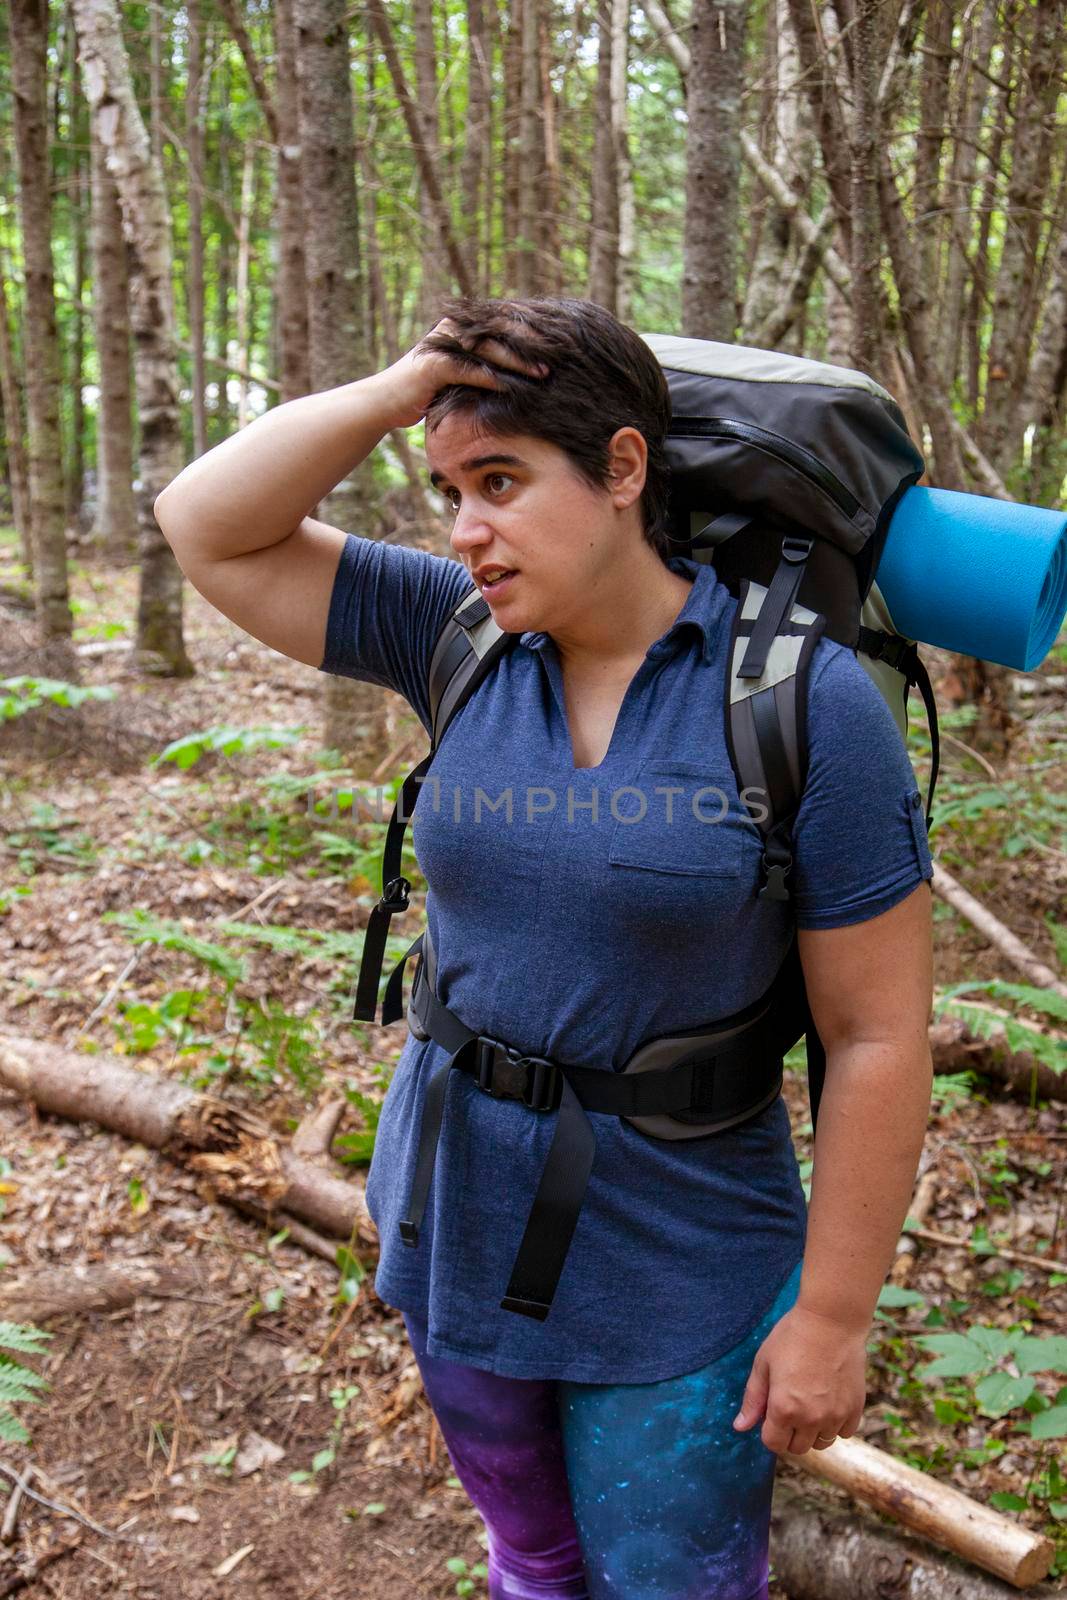  person looks very upset or stressed while lost in the woods 